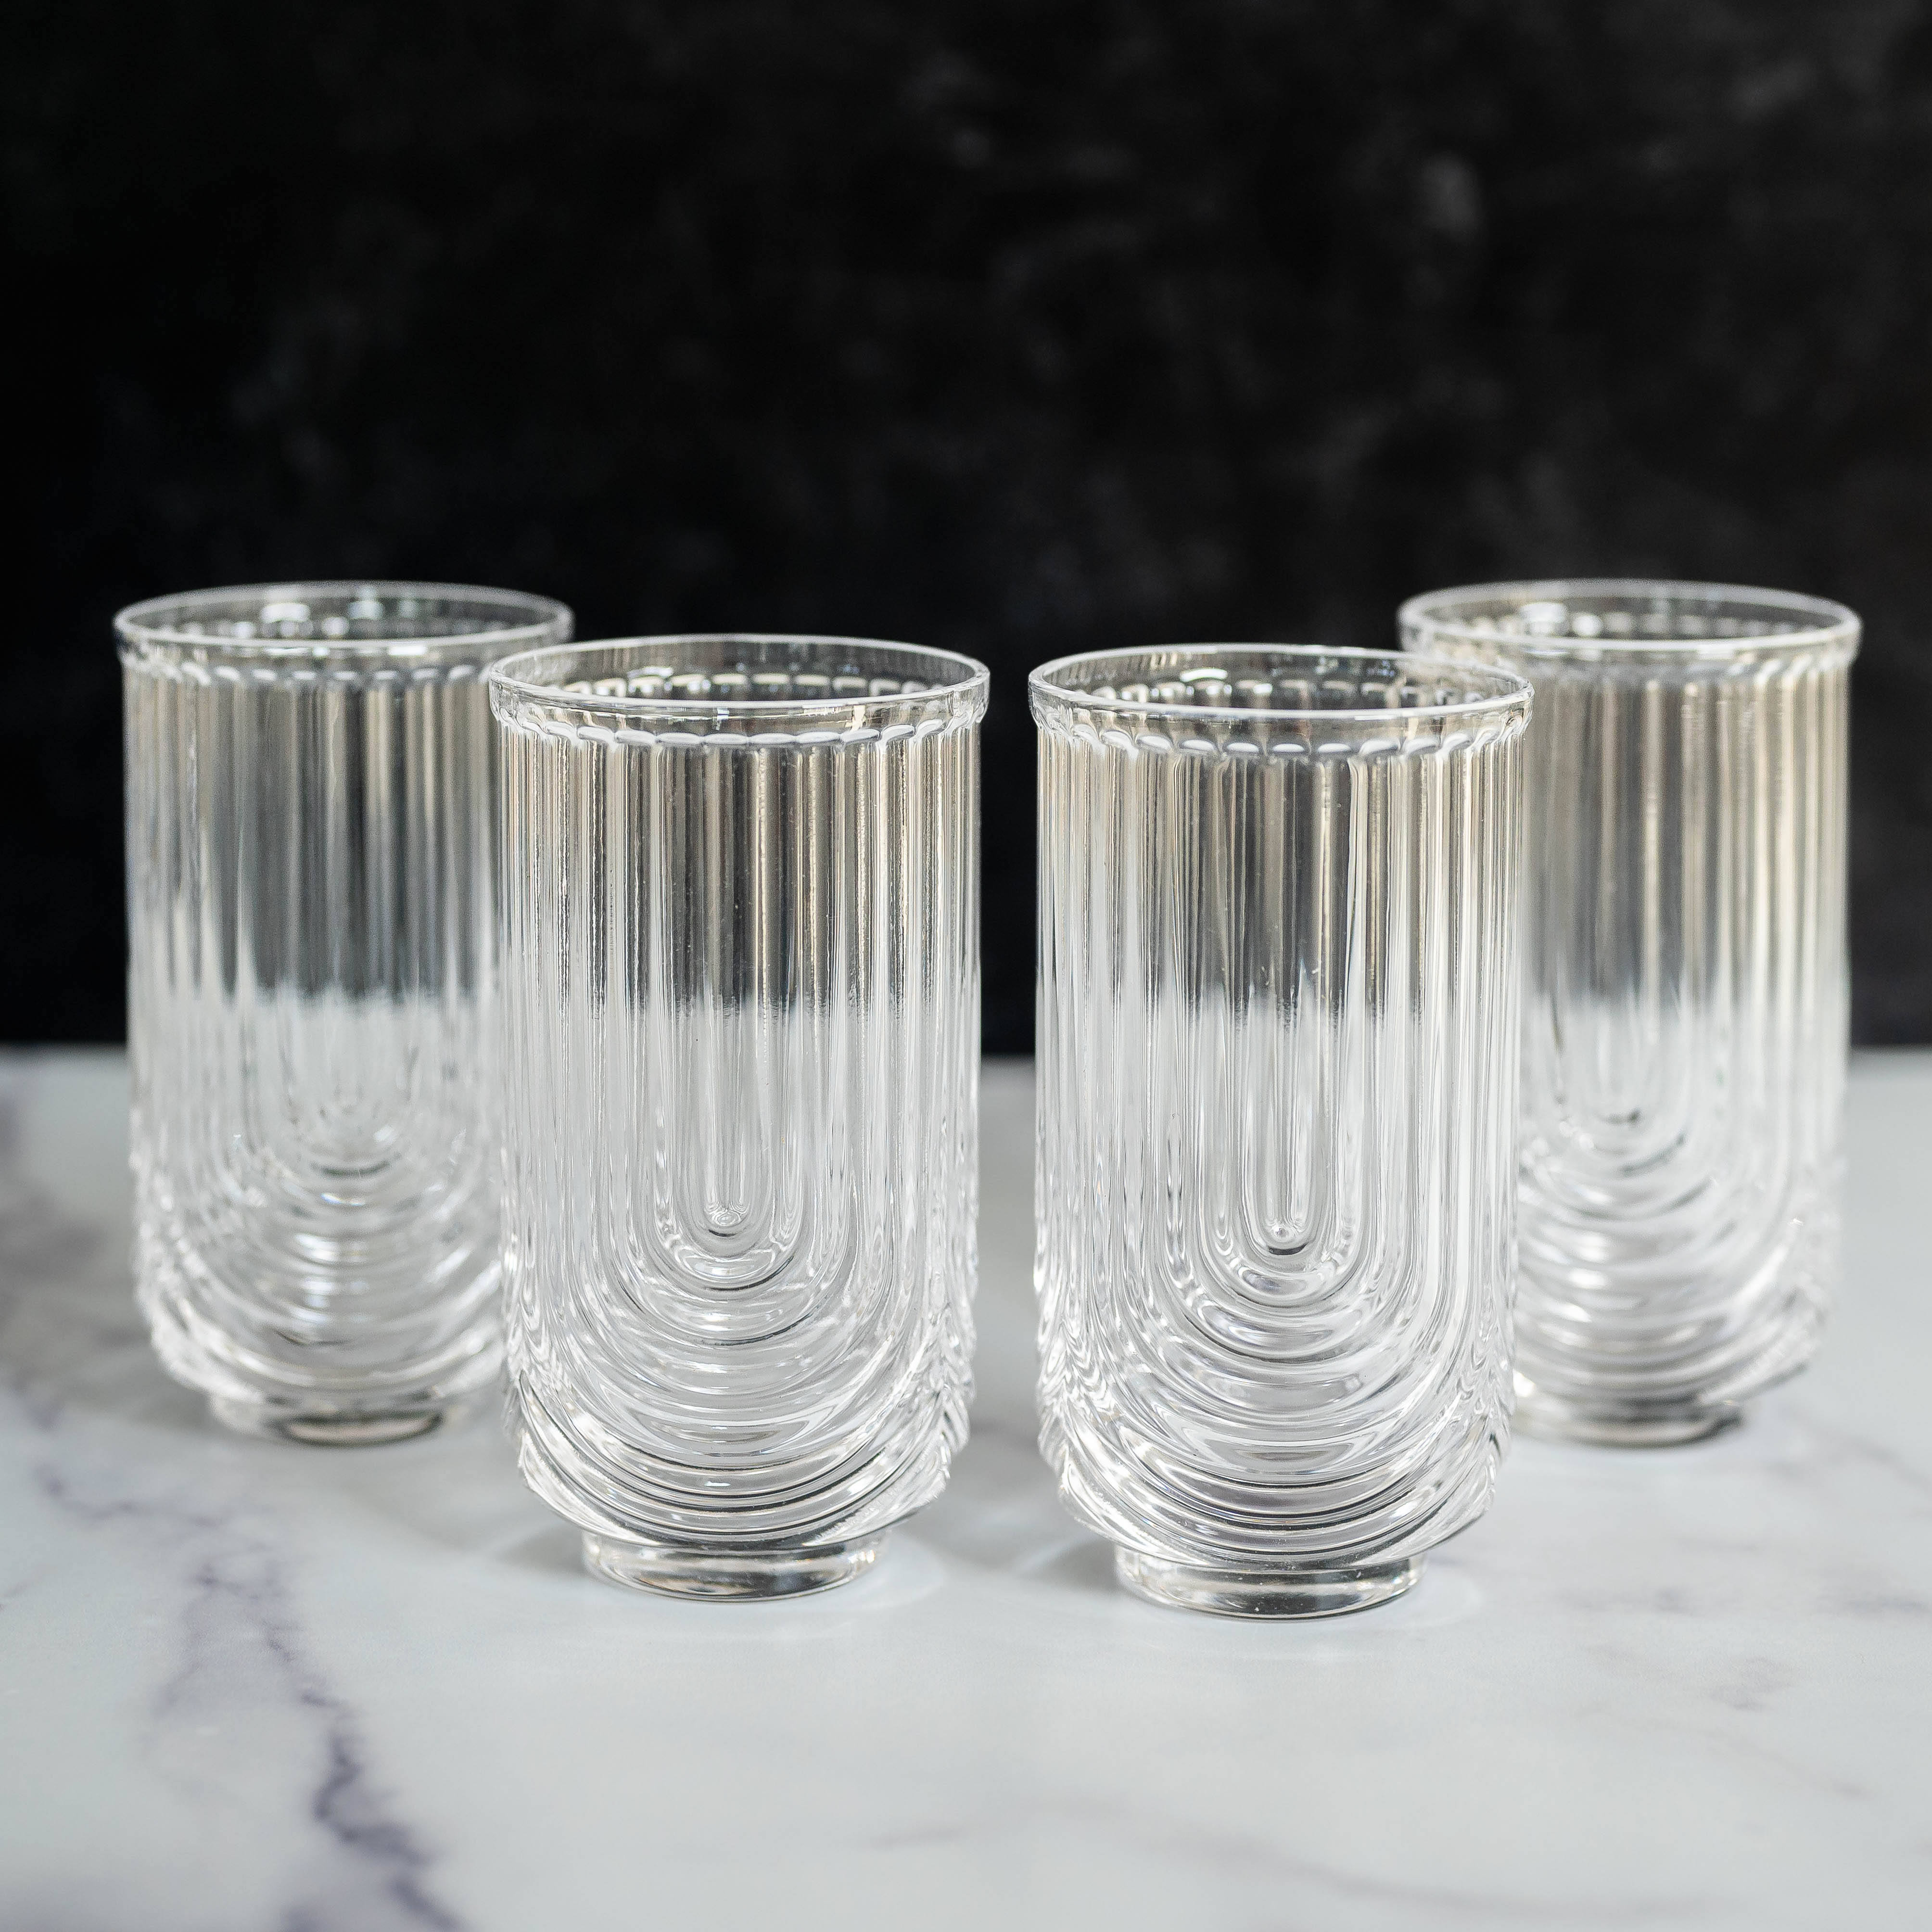 Tall Cocktail Glasses Set of 4